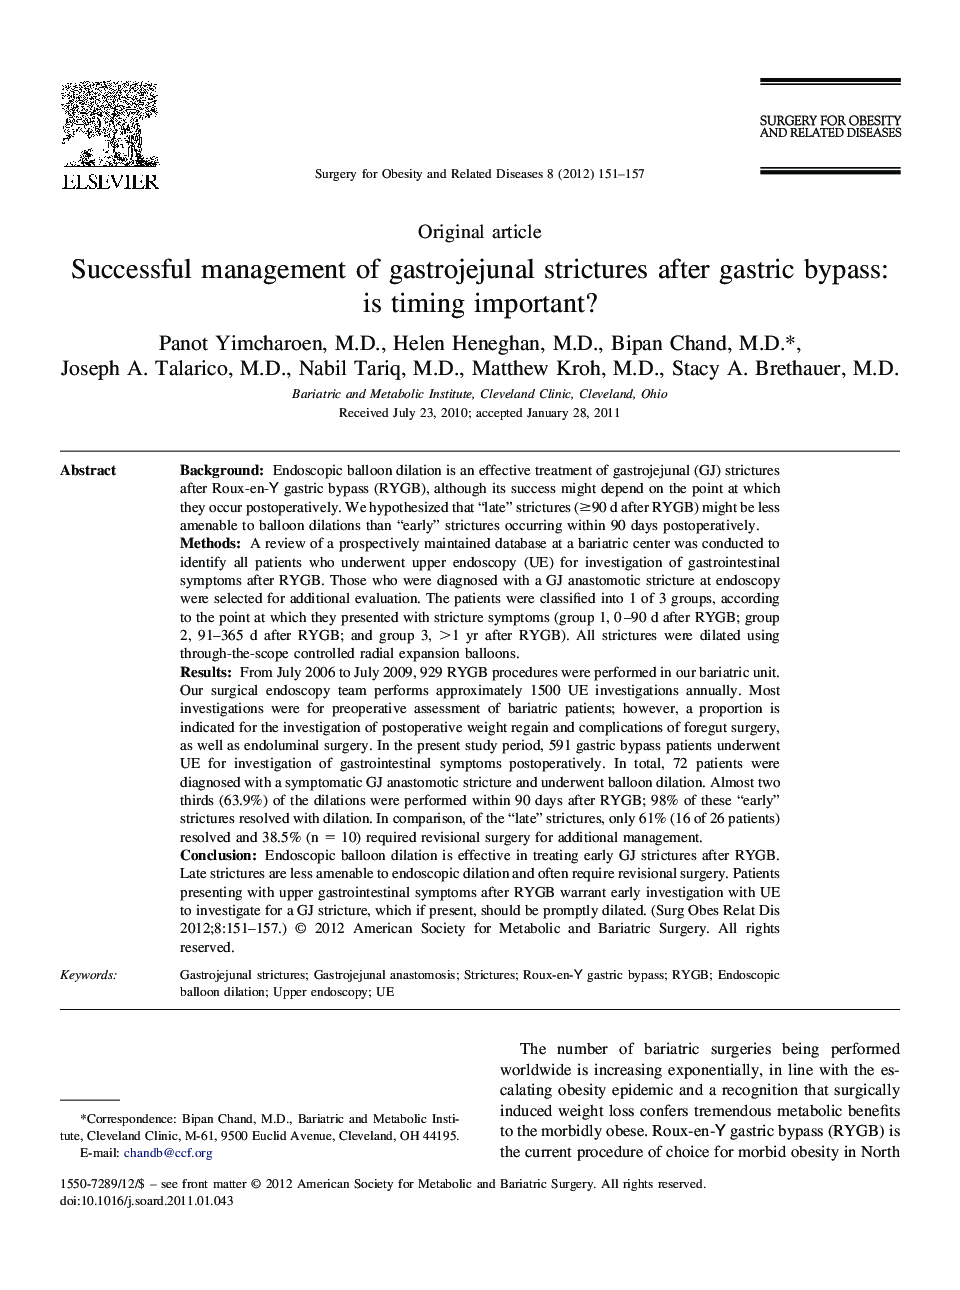 Successful management of gastrojejunal strictures after gastric bypass: is timing important?